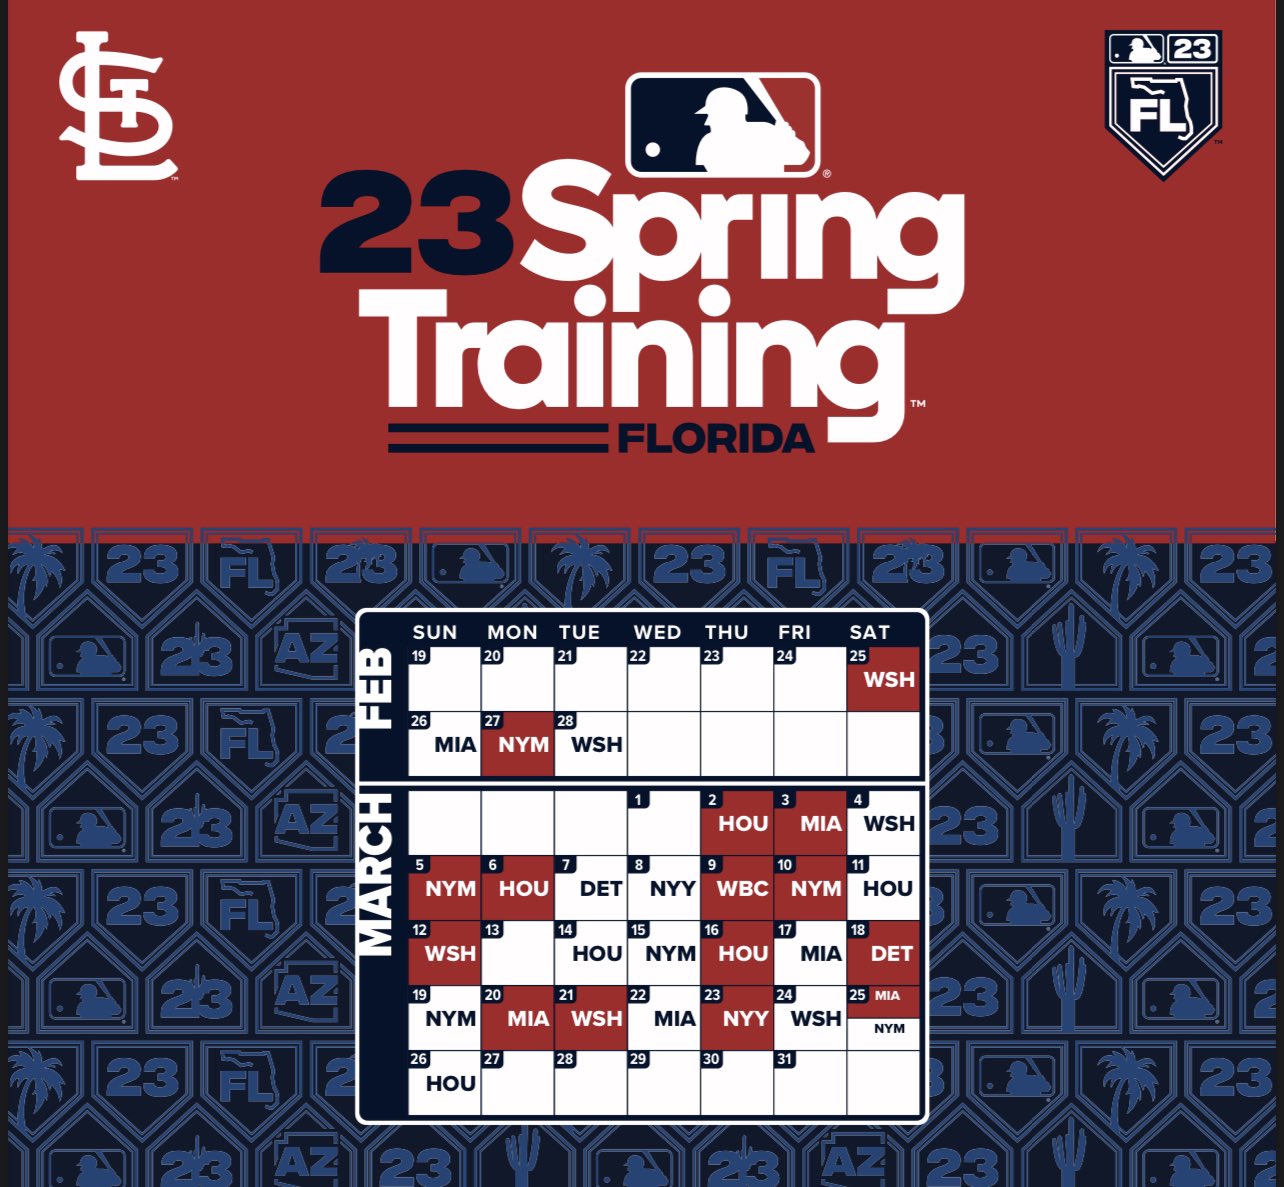 Cardinals announce 2023 schedule, team will open at home against